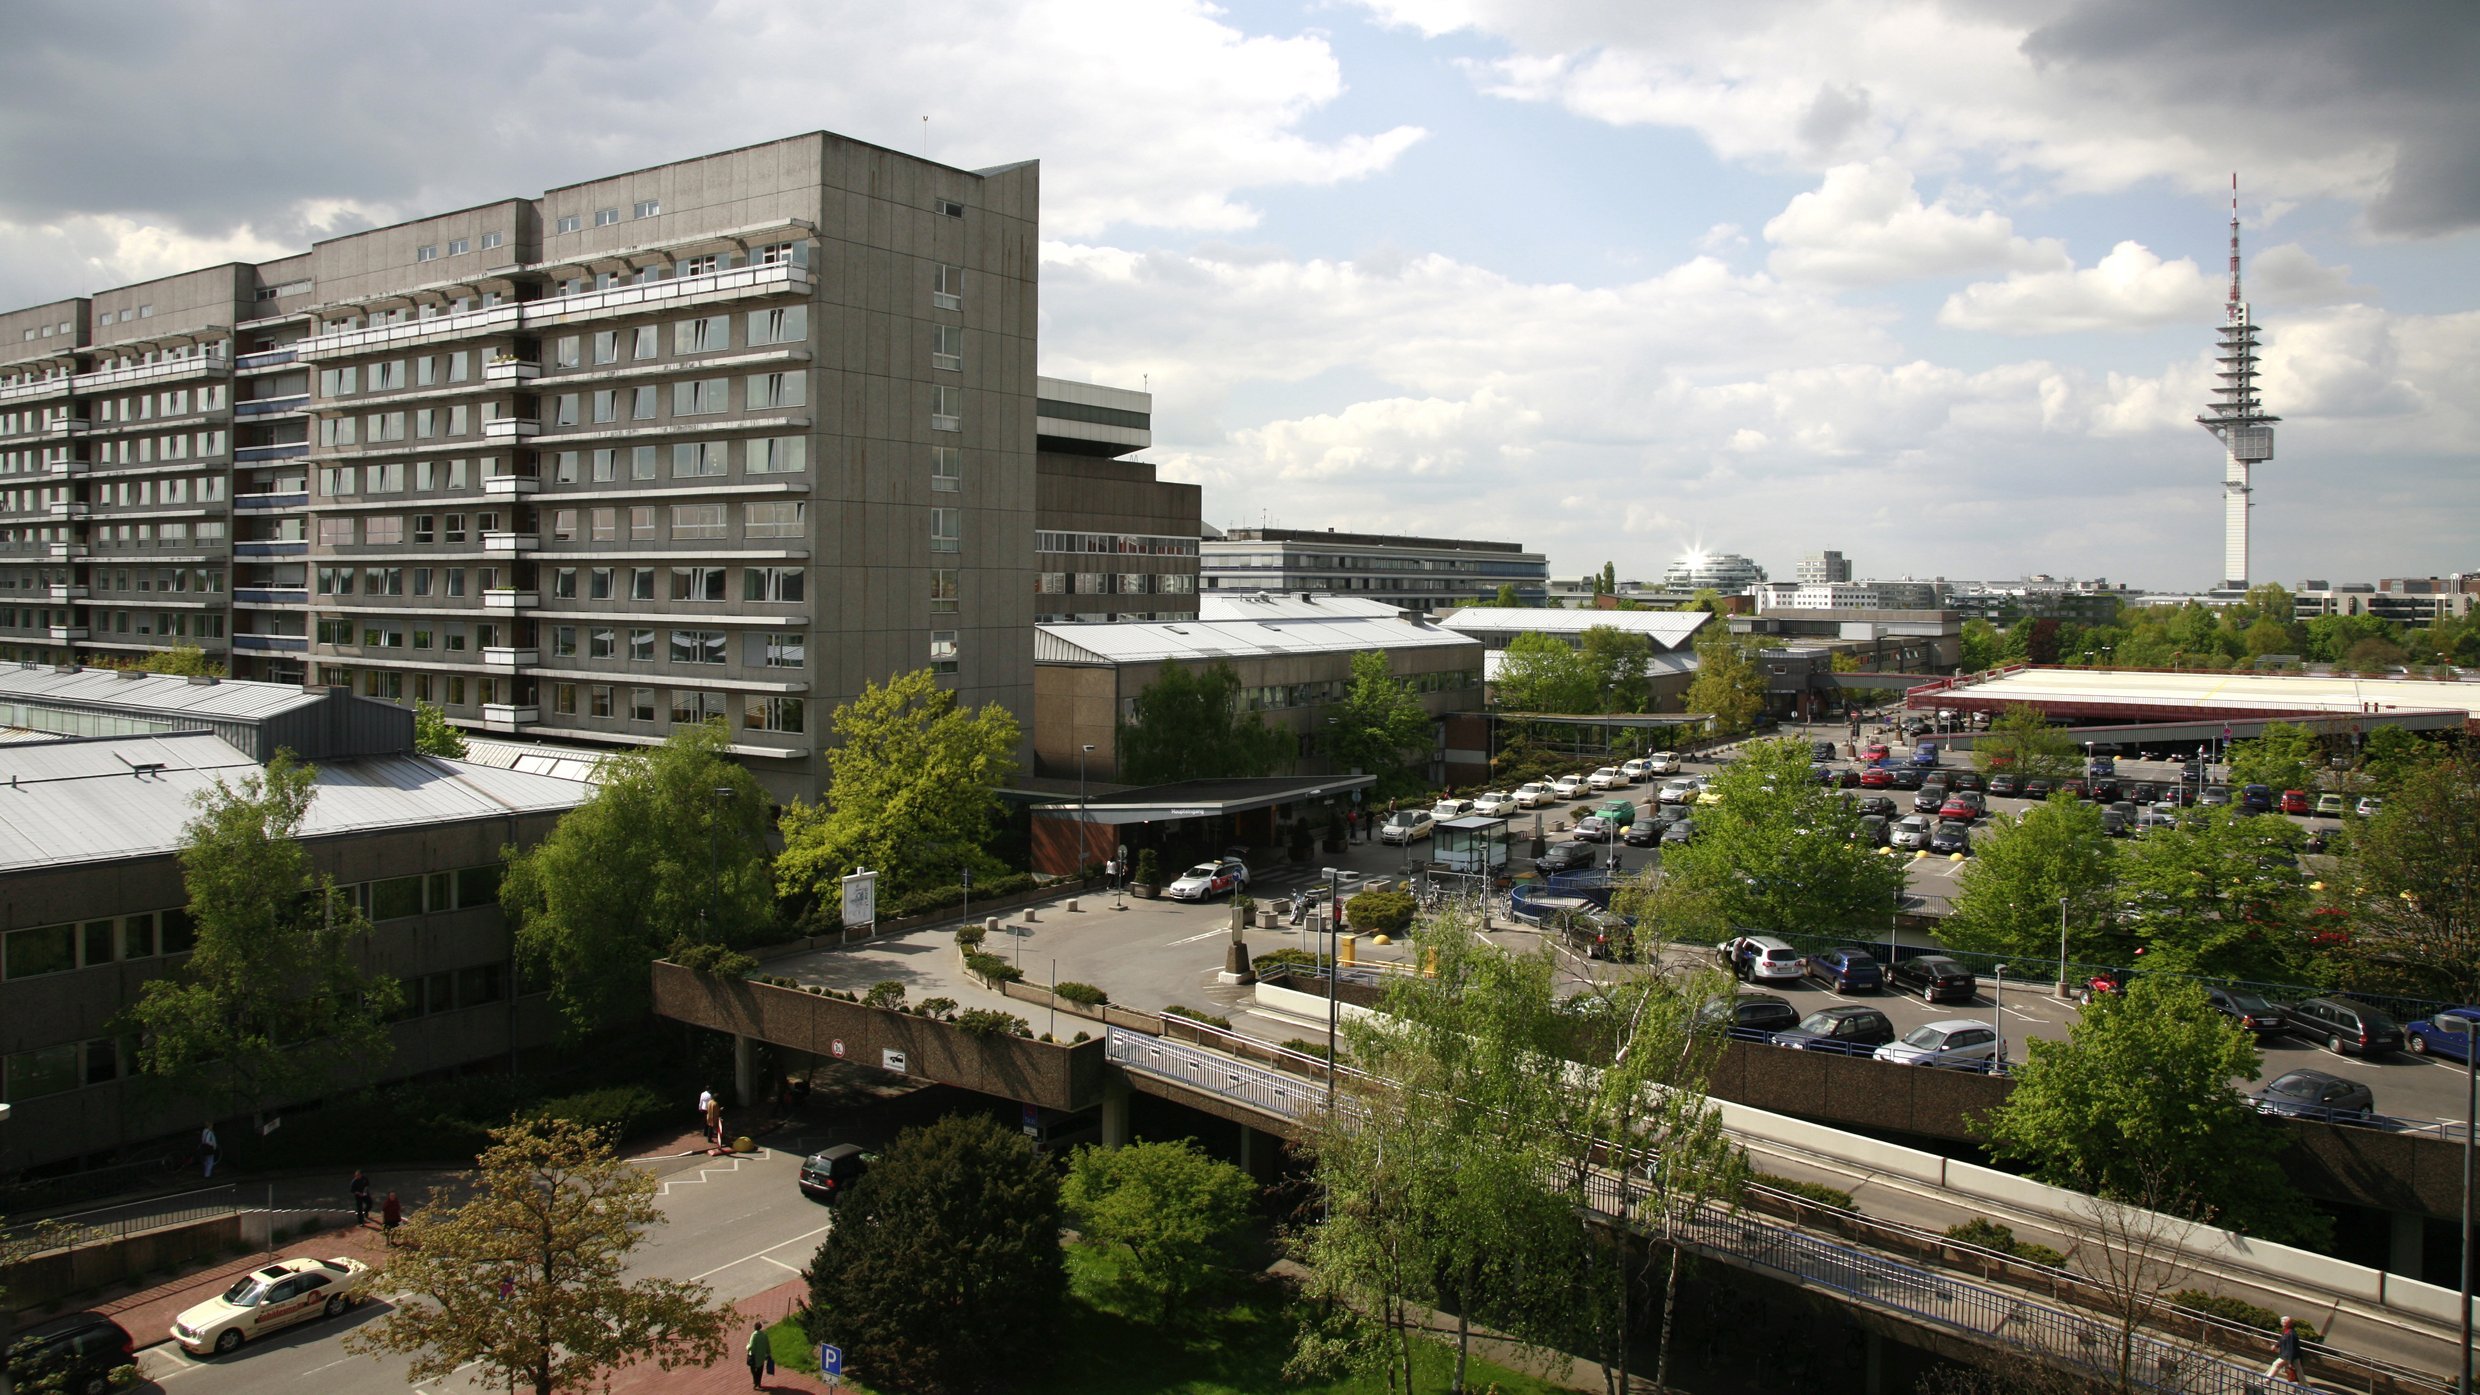 MHH campus with ward block and car park from above. 